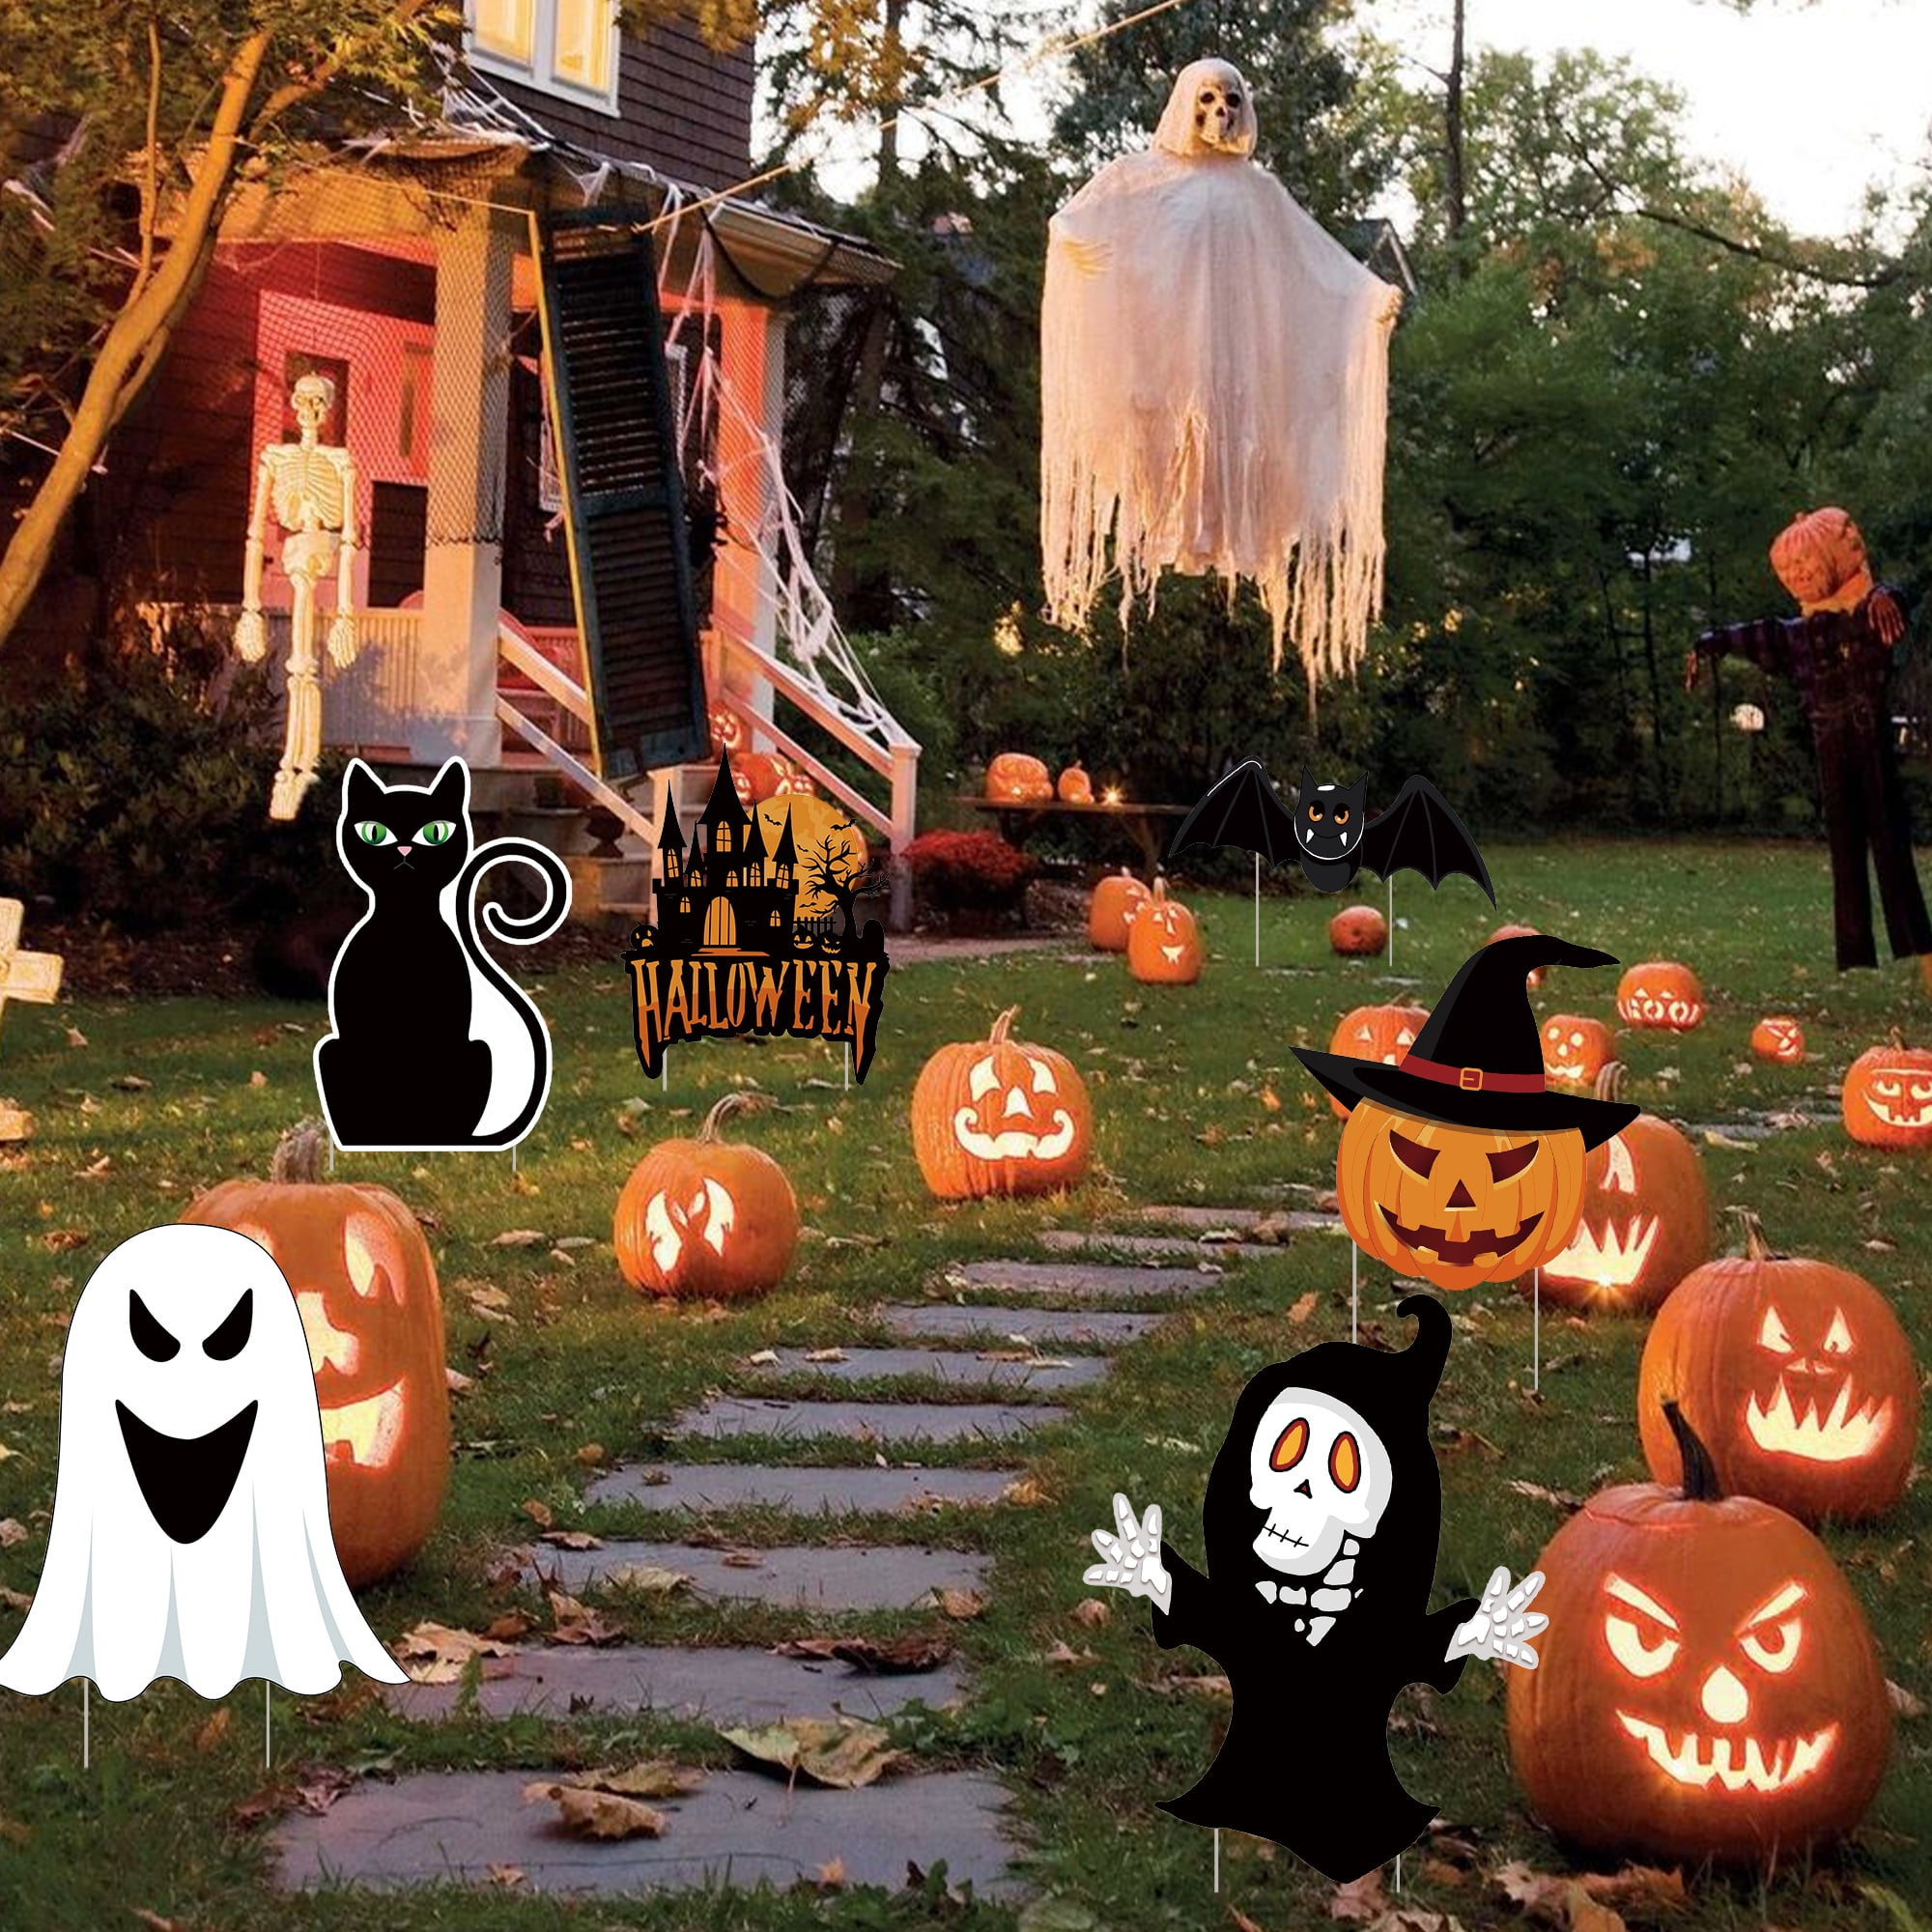 6 Pcs Halloween Decorations Outdoor Corrugate Yard Signs for Lawn ...